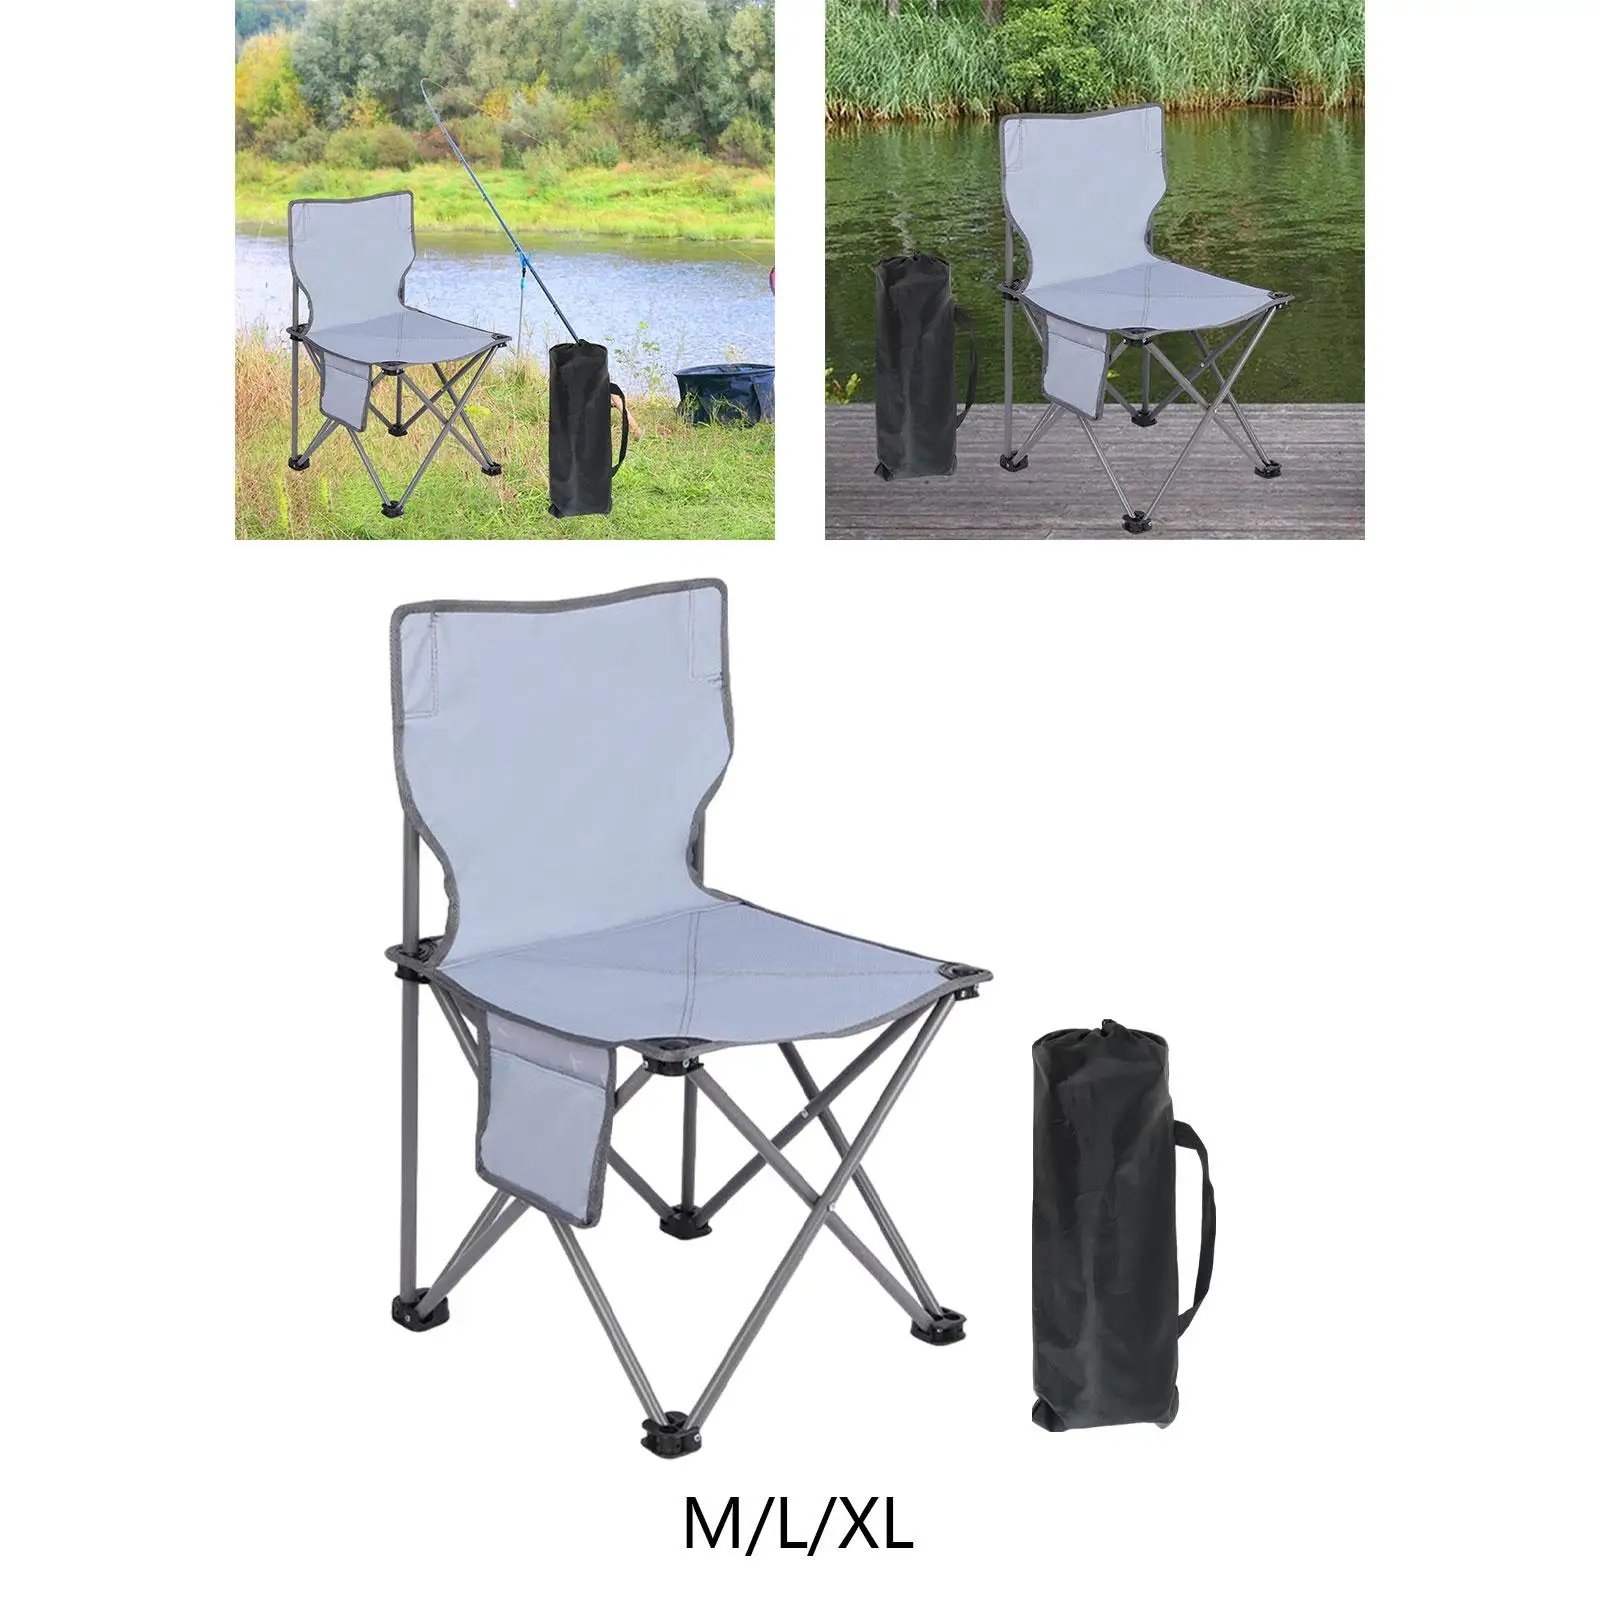 Portable Camping Chair High Back with Storage Bag Nonslip Folding Chair Fishing Chair for Park Picnic Patio Garden Backpacking